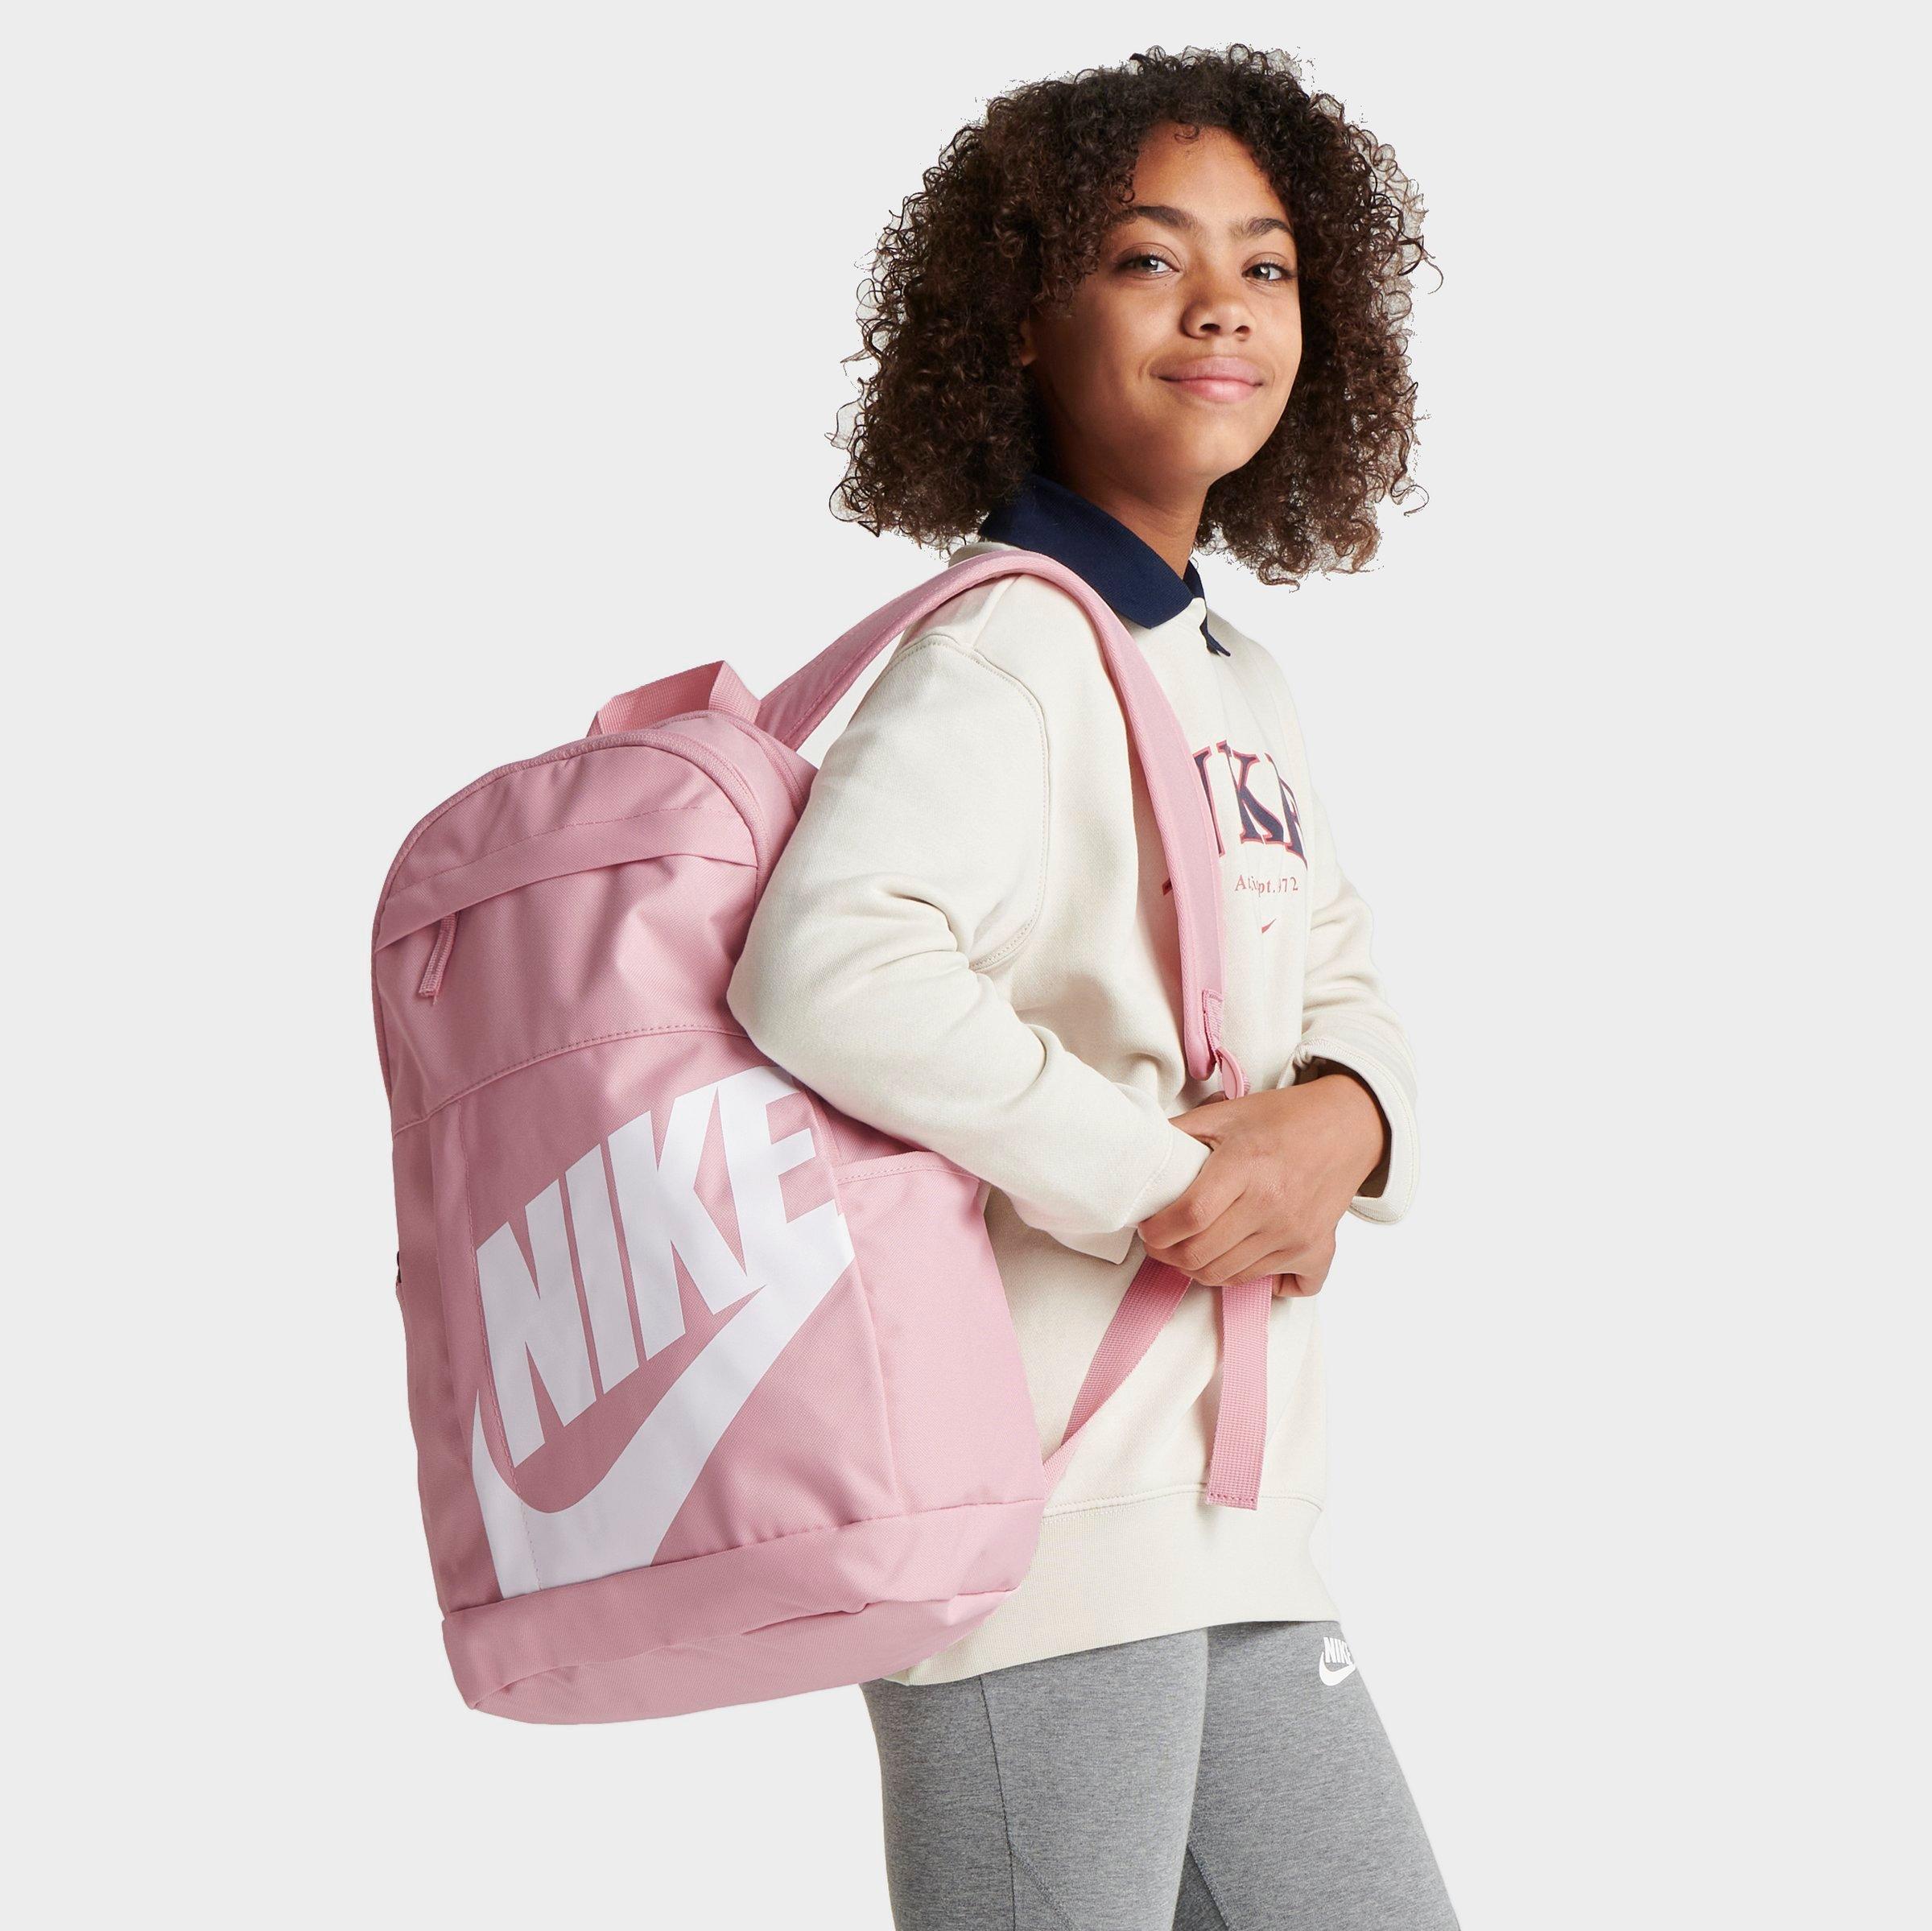 Nike, Bags, Matching Purse And Shoes Sets